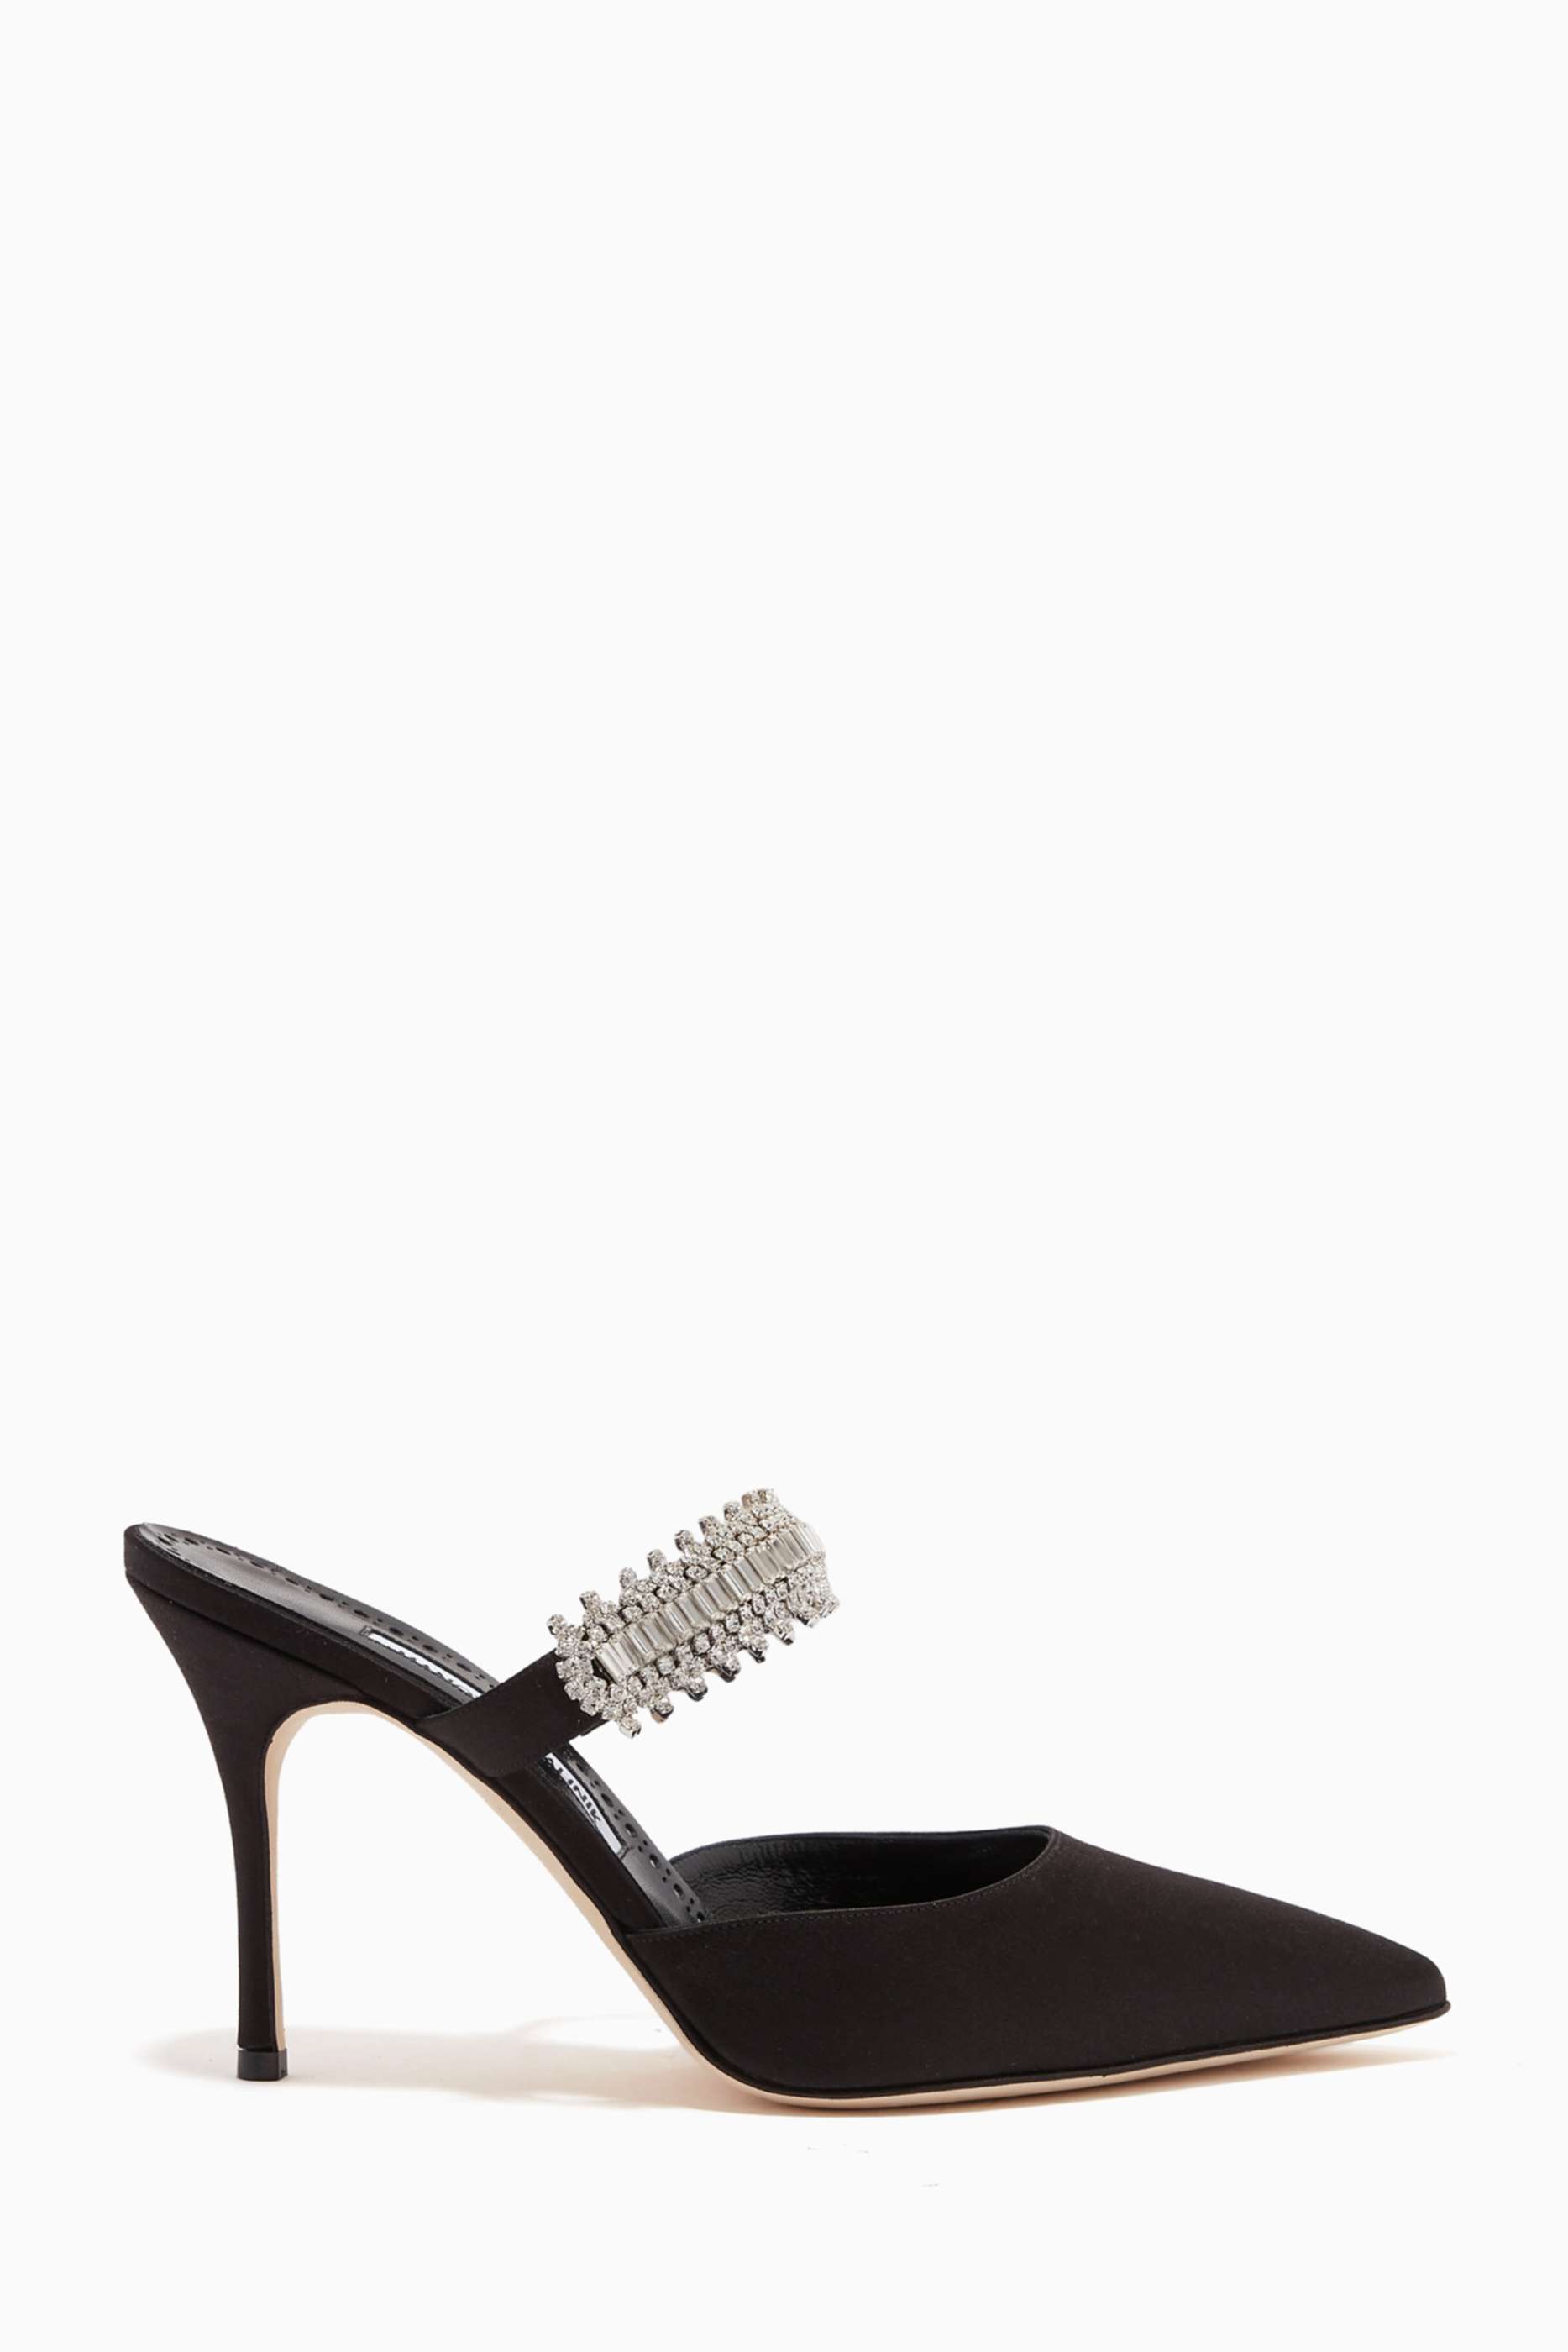 Shop Elisabetta Franchi Black Low Mules in Mesh Stitch Leather for 